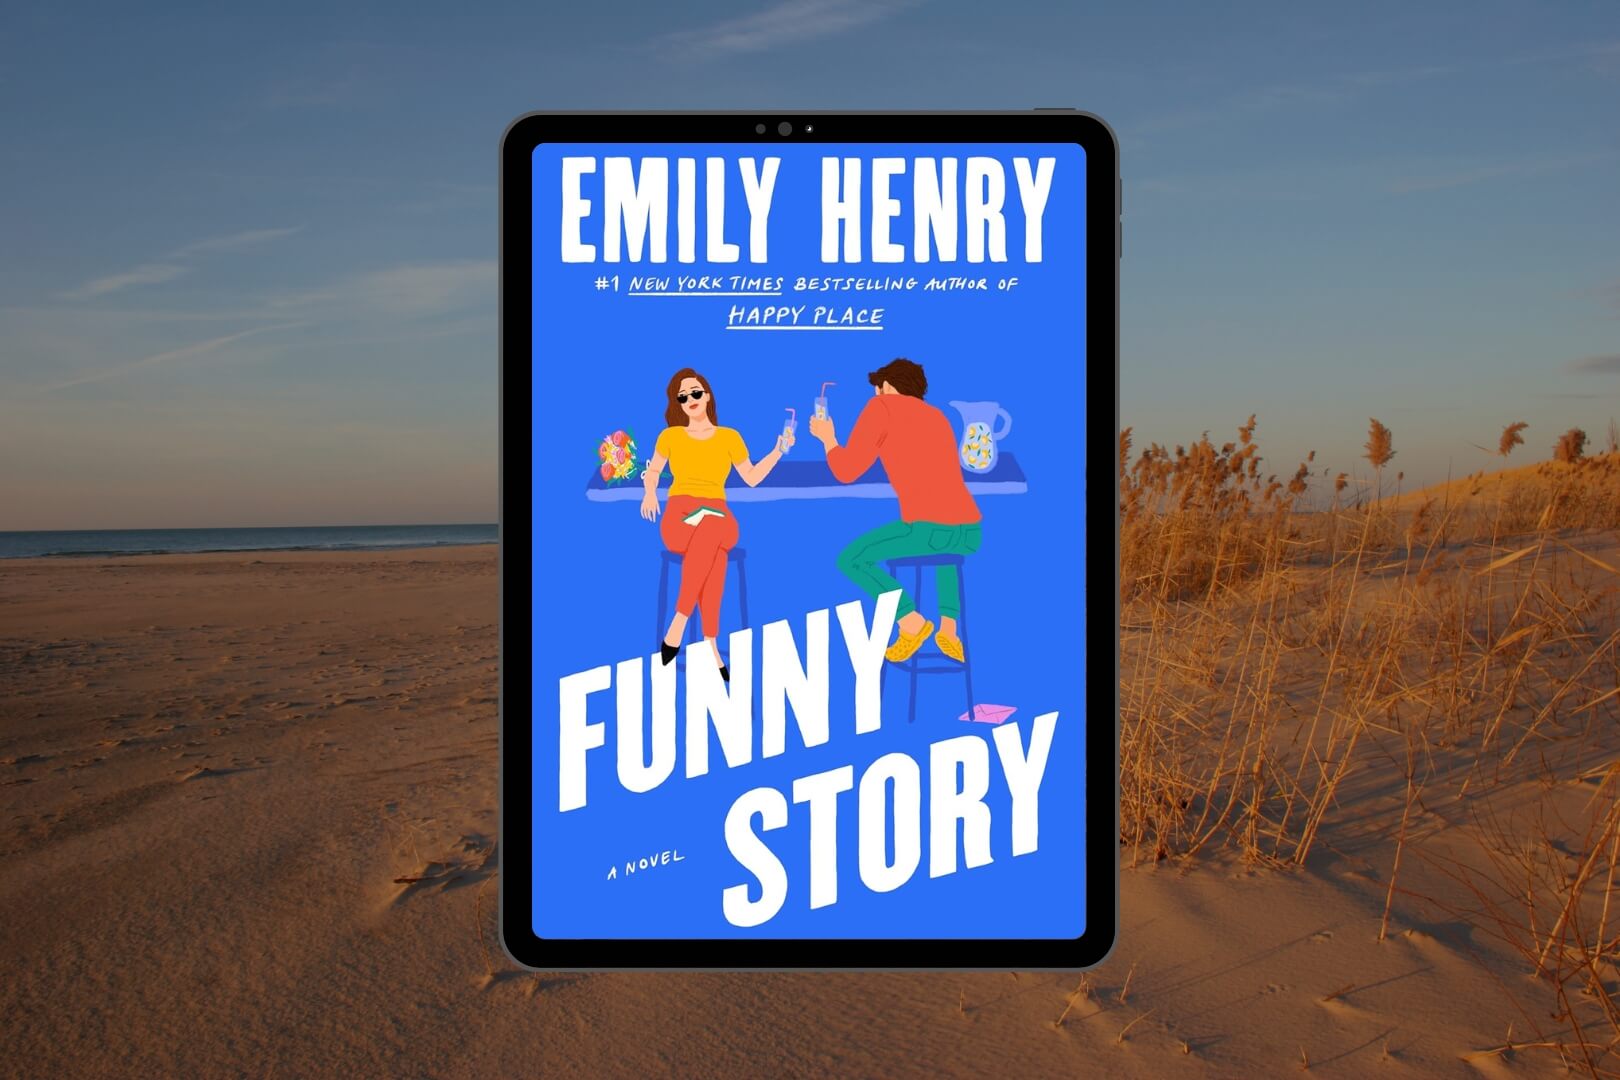 Review: Funny Story by Emily Henry